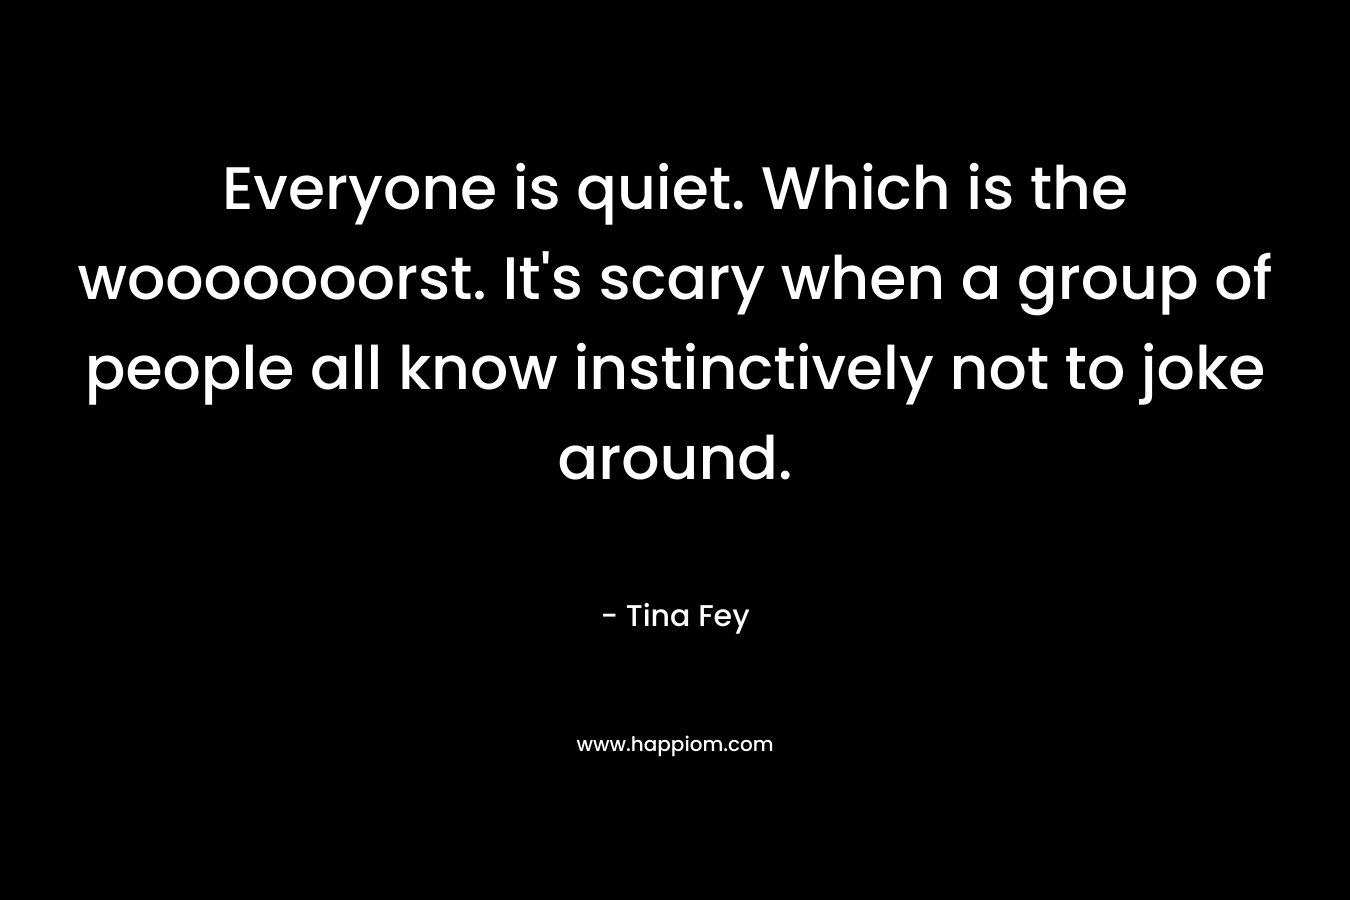 Everyone is quiet. Which is the wooooooorst. It’s scary when a group of people all know instinctively not to joke around. – Tina Fey